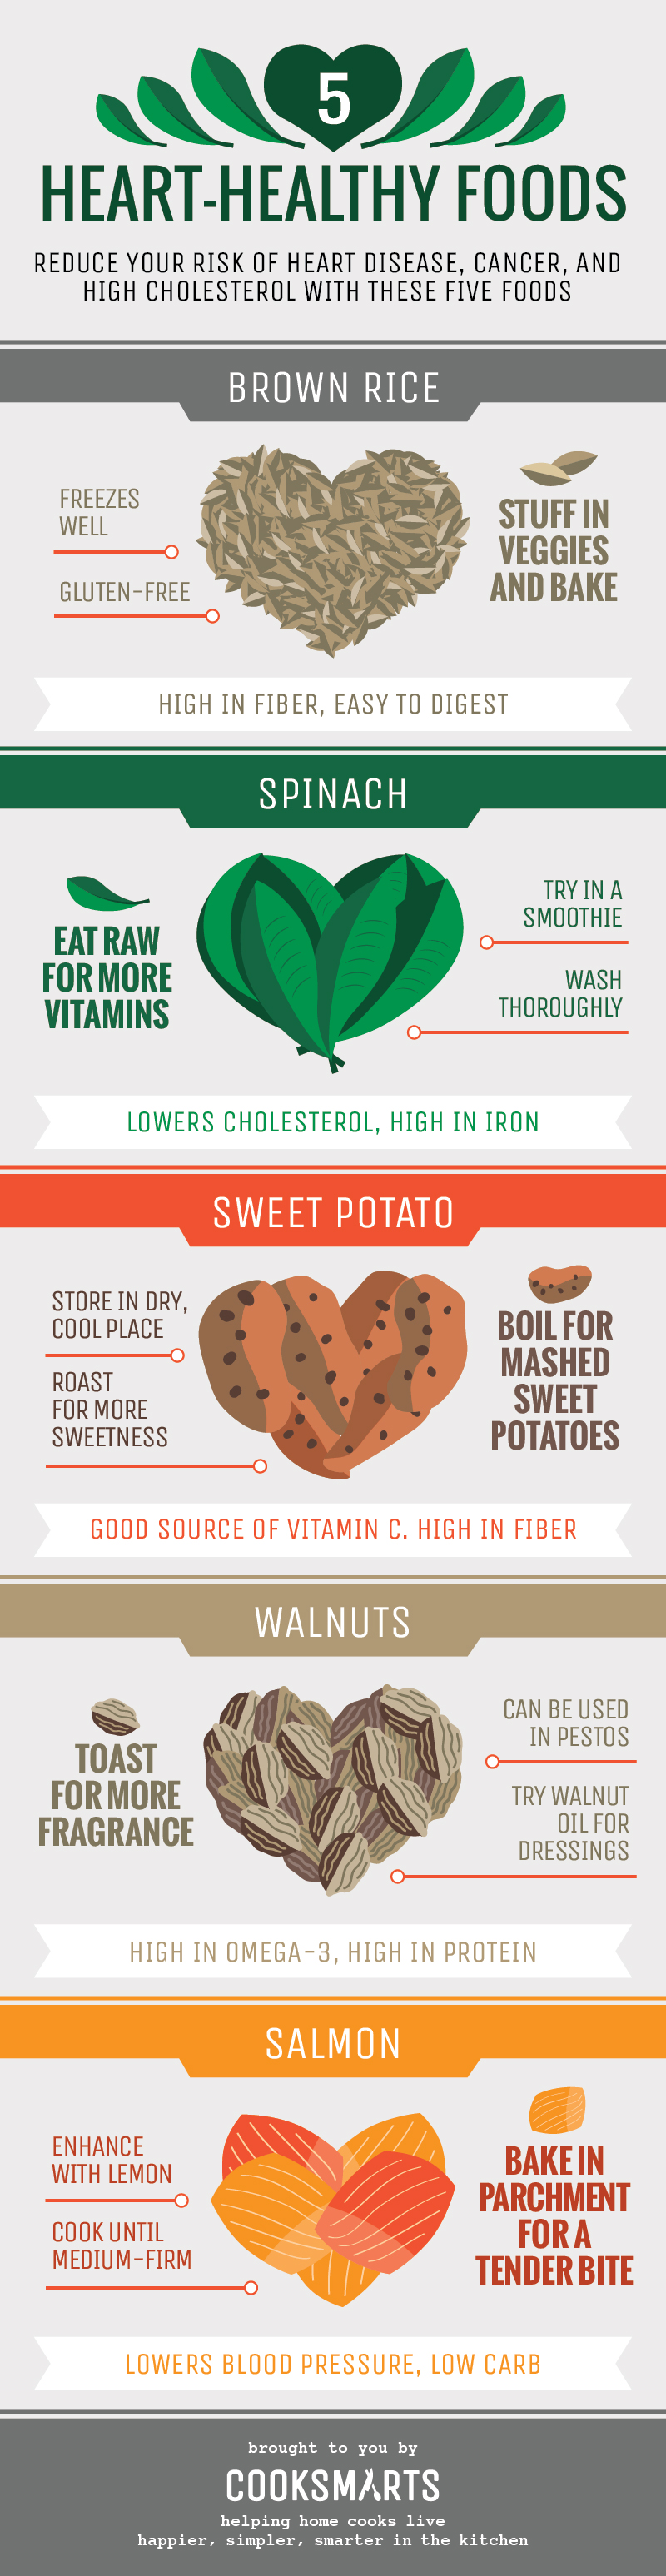 cholesterol_lowering_Foods_Infographic